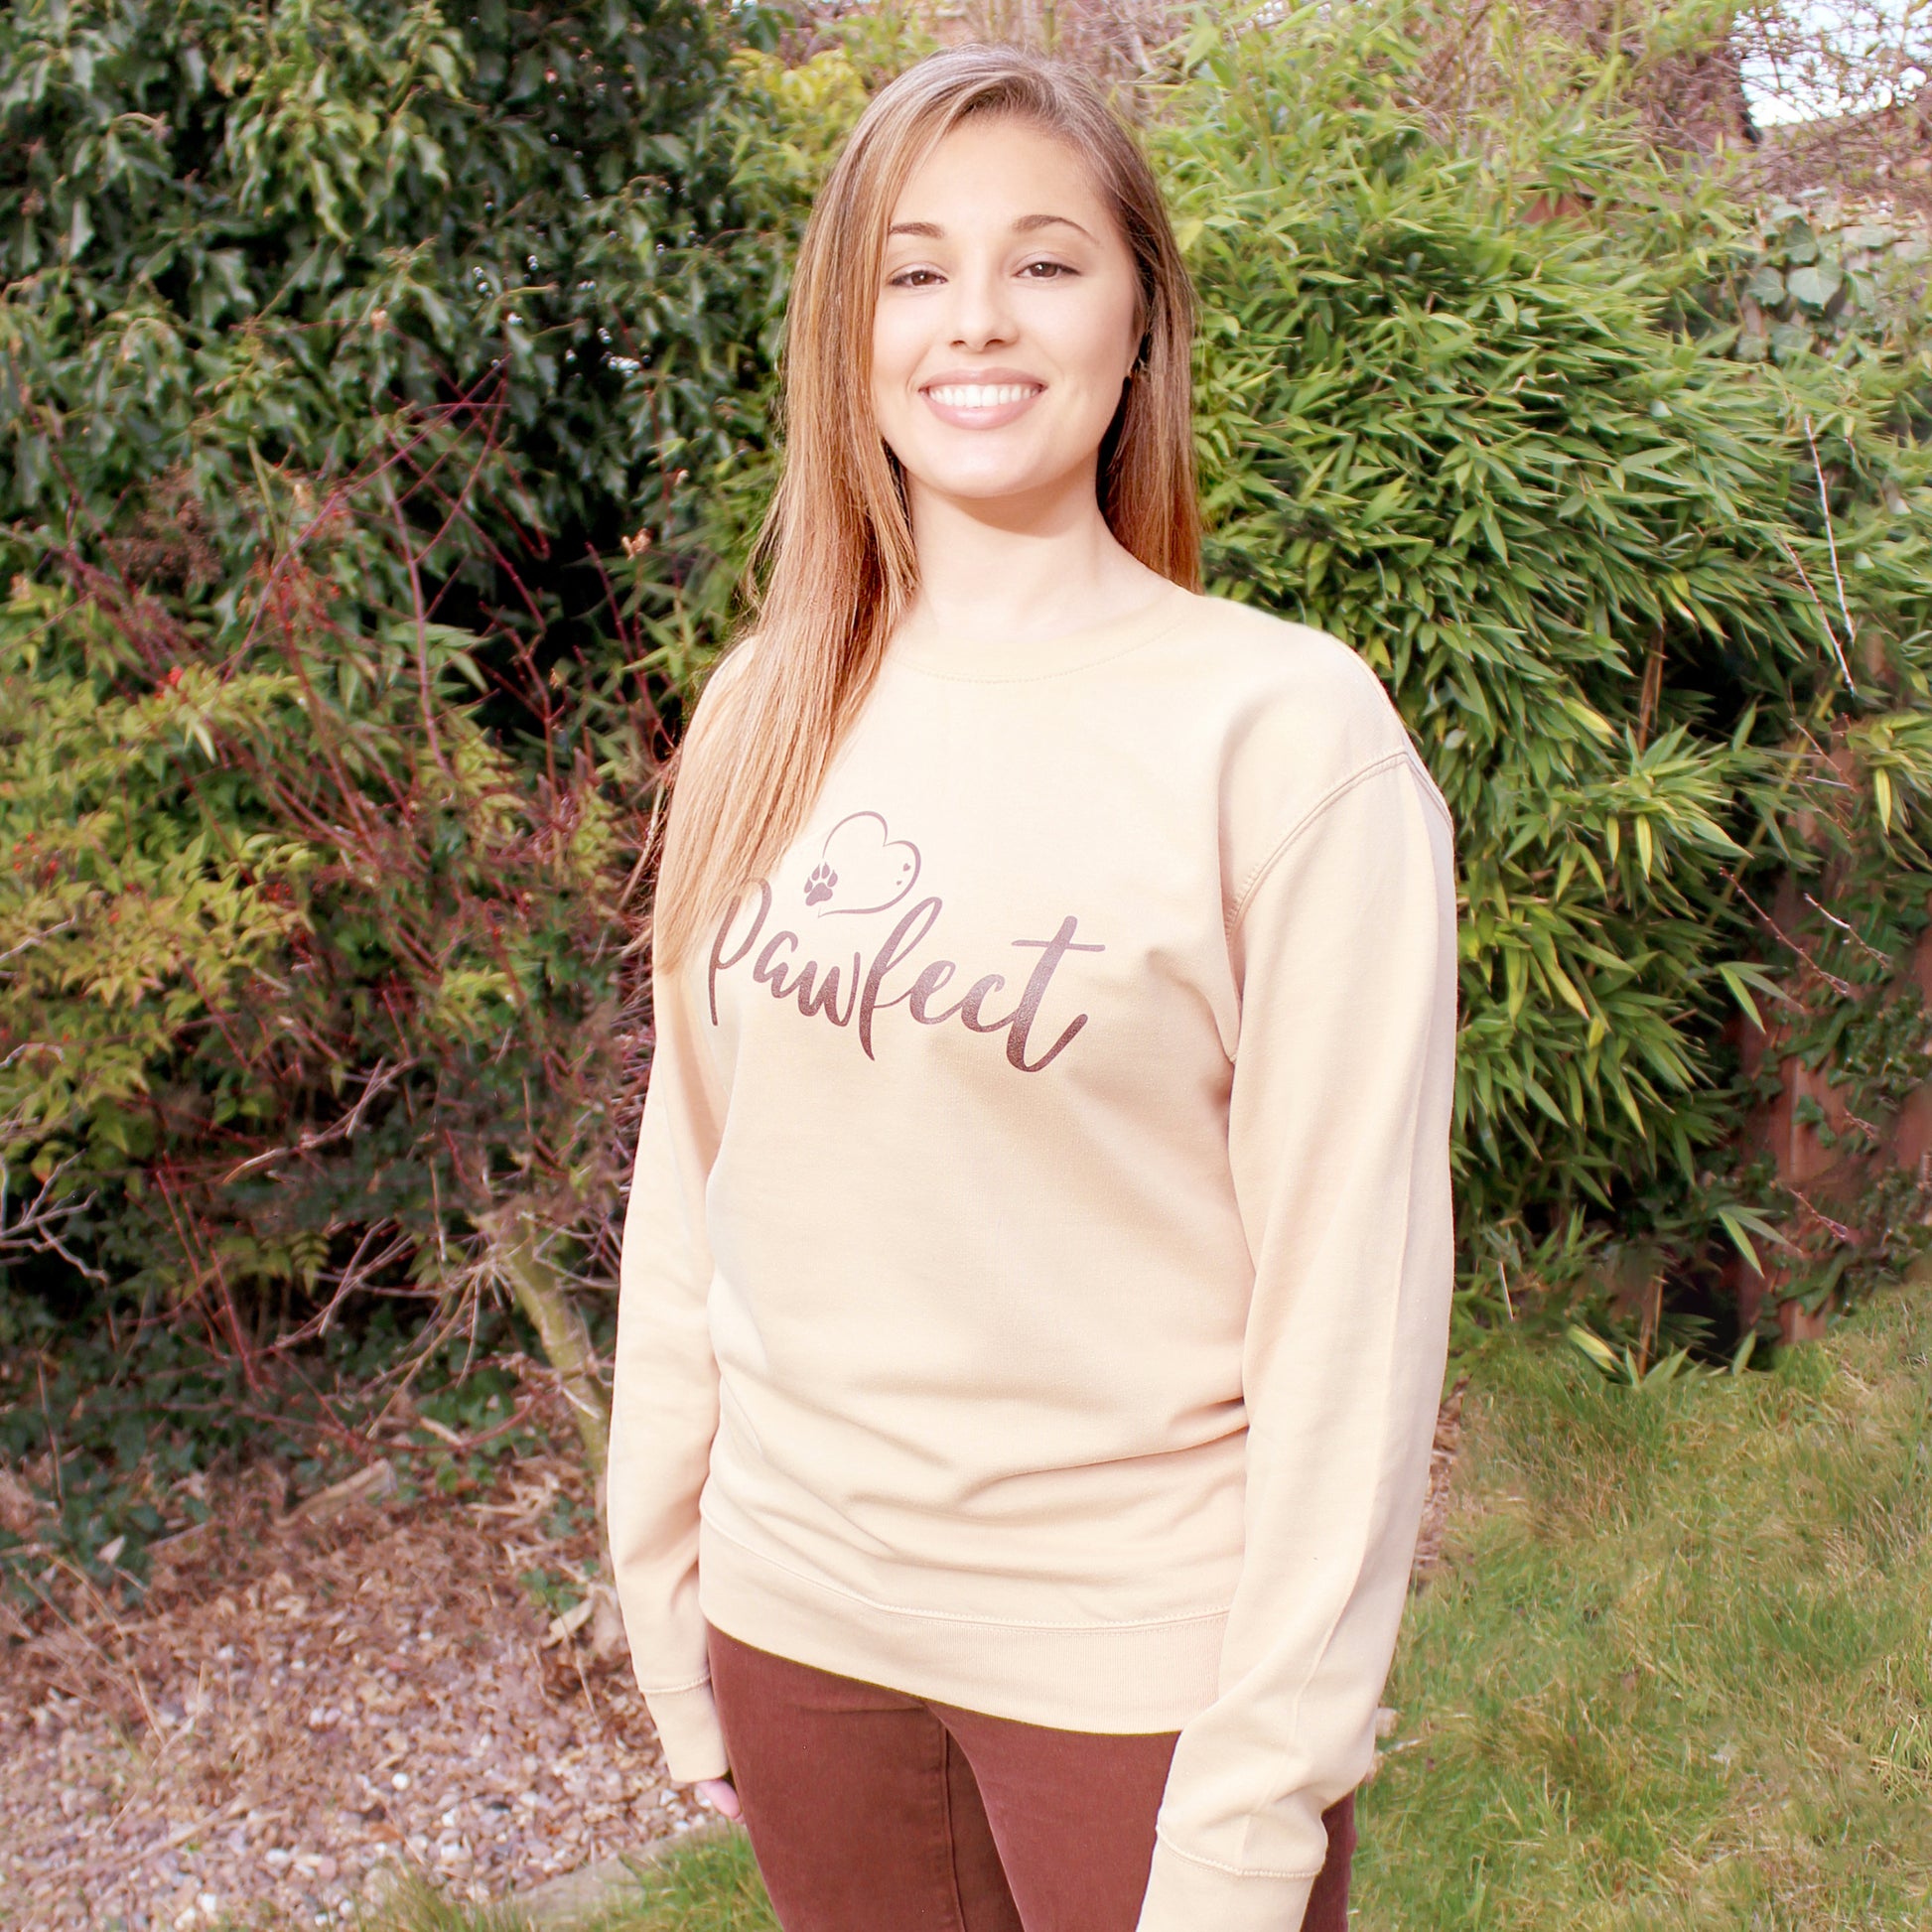 Beige / Caramel colour relaxed fit long sleeve sweatshirt worn by caucasian woman with long brown hair. Slogan sweater design wording Pawfect in brown font and brown heart outline above with dog paw print within outline. Woman wears rust colour jeans and is stood in outdoors in a garden with plants behind